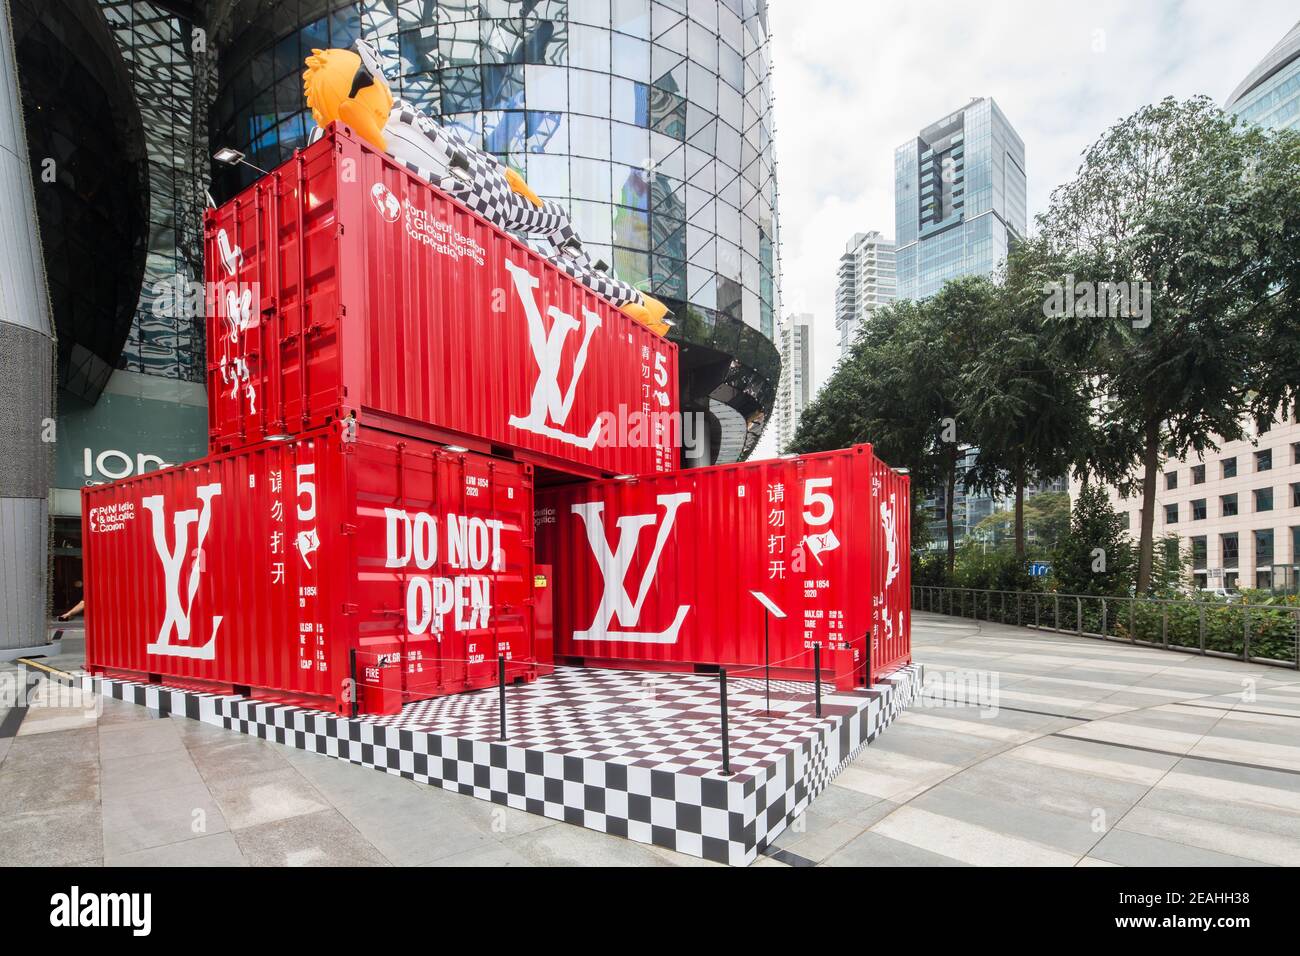 Style News: Louis Vuitton's shipping container pop-up, CNY beauty launches